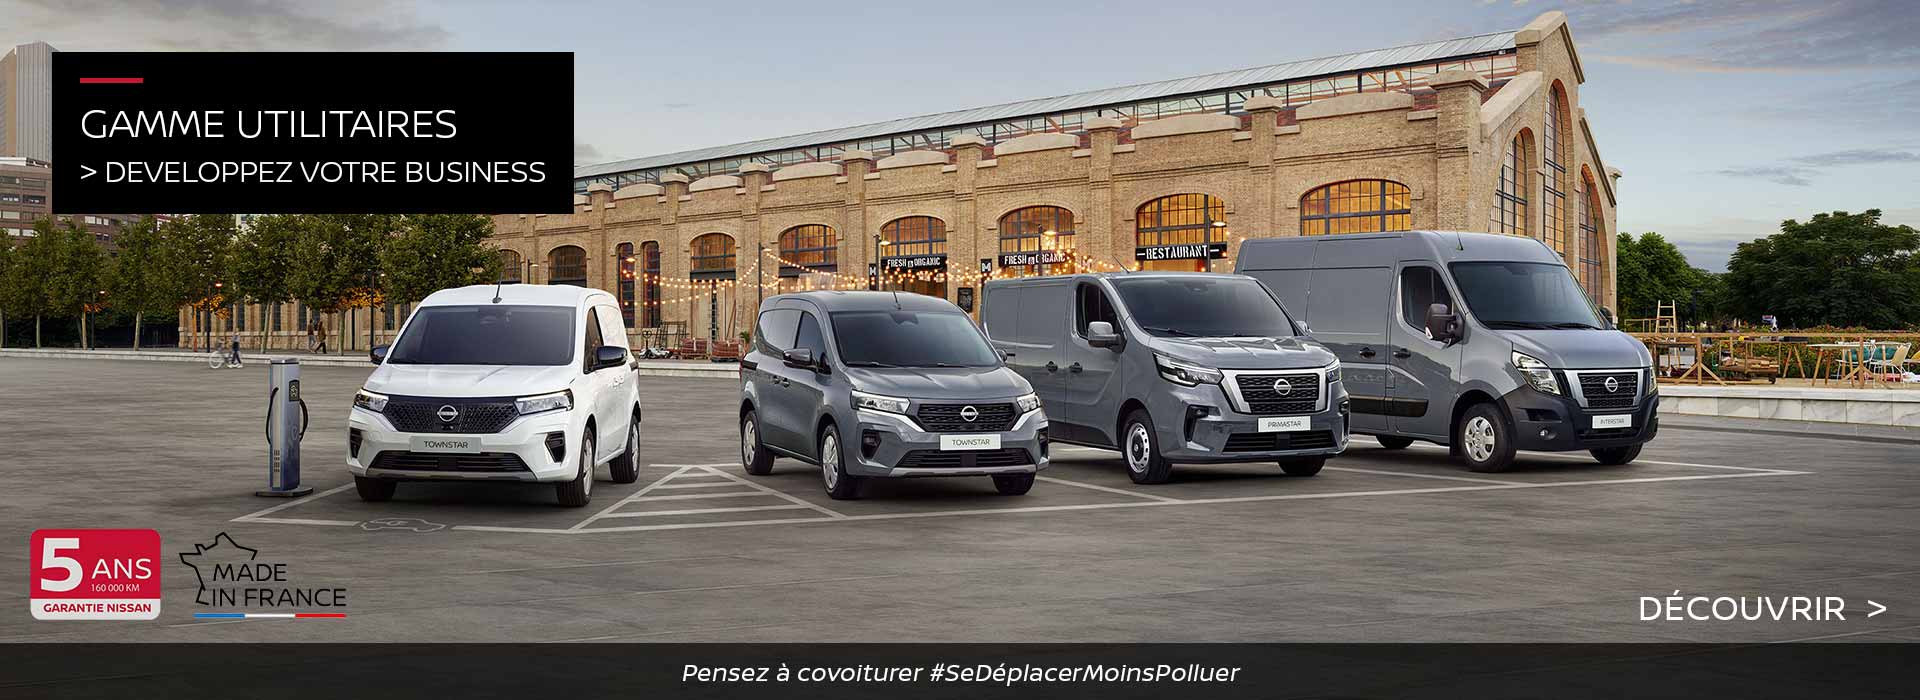 Gamme Nissan Utilitaires